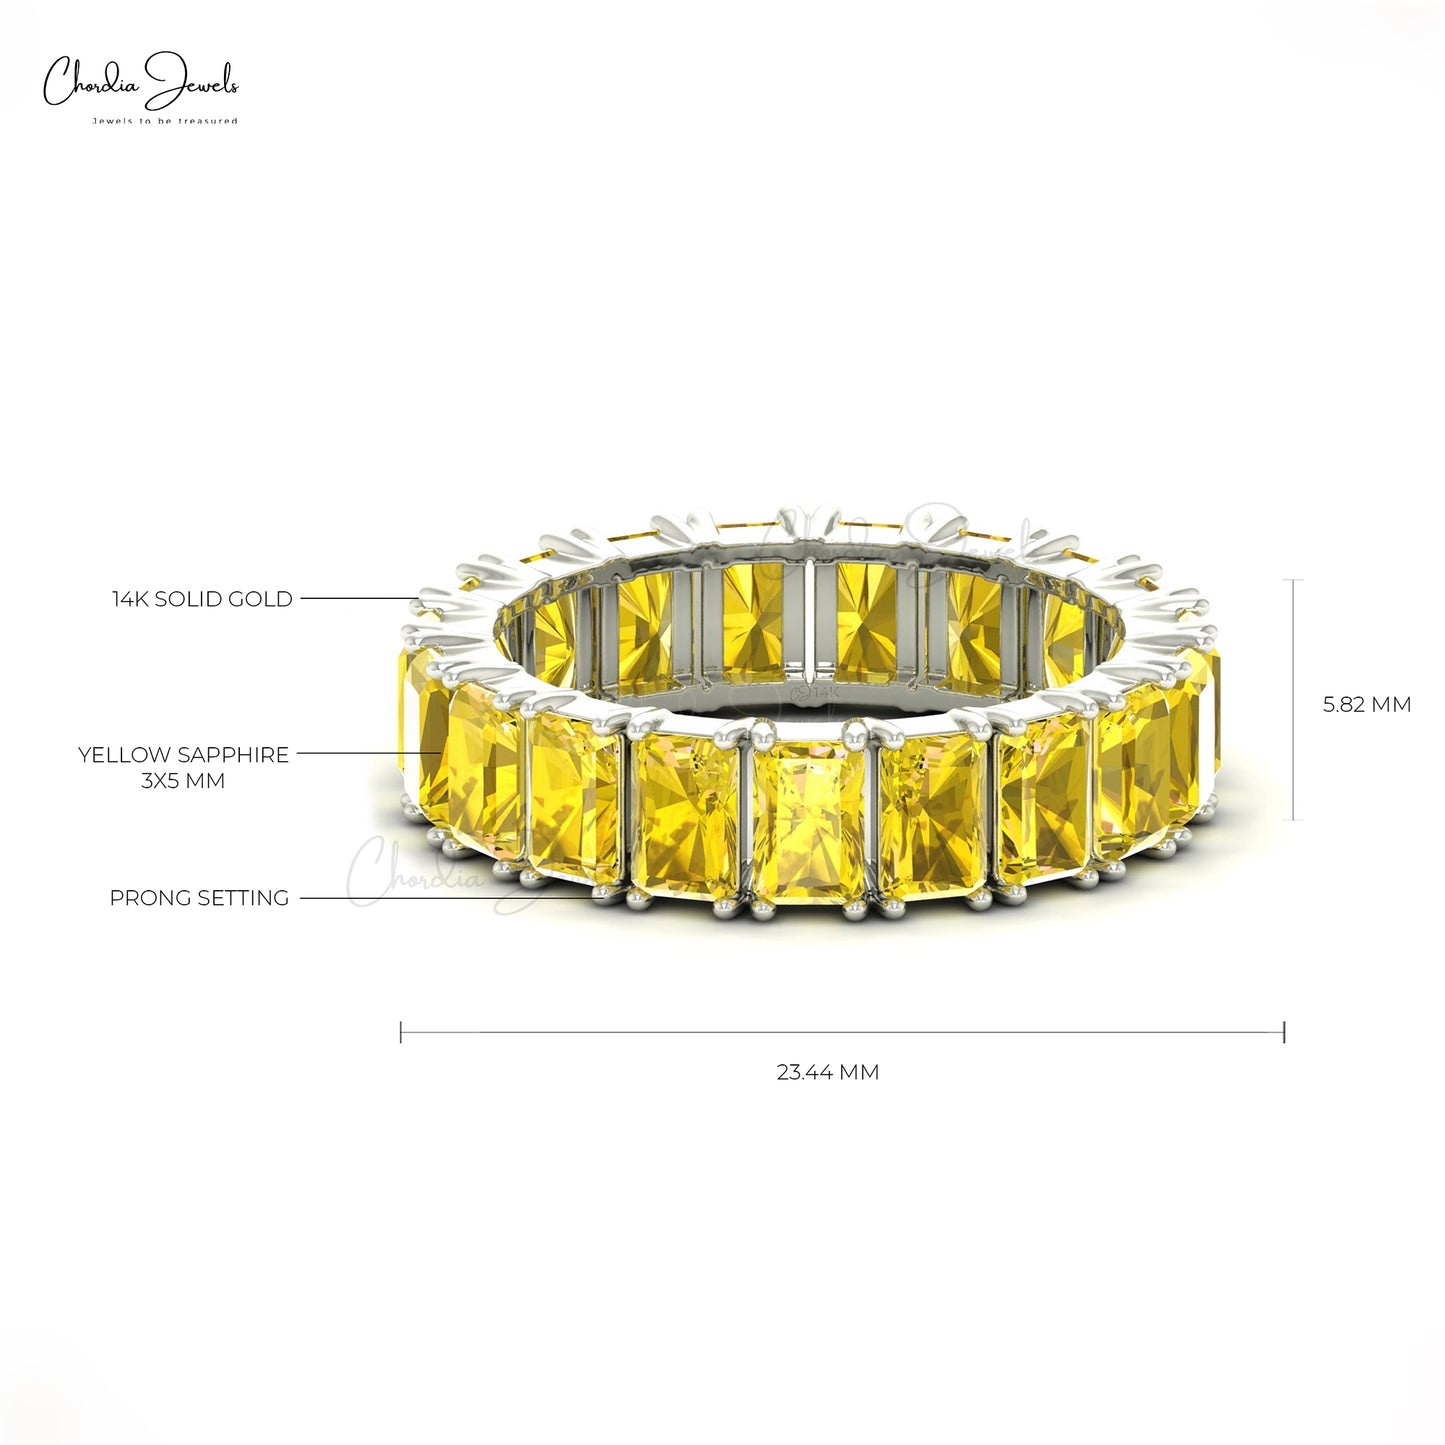 Genuine Yellow Sapphire Eternity Ring in Real 14k White Gold Band Valentine's Day Gift